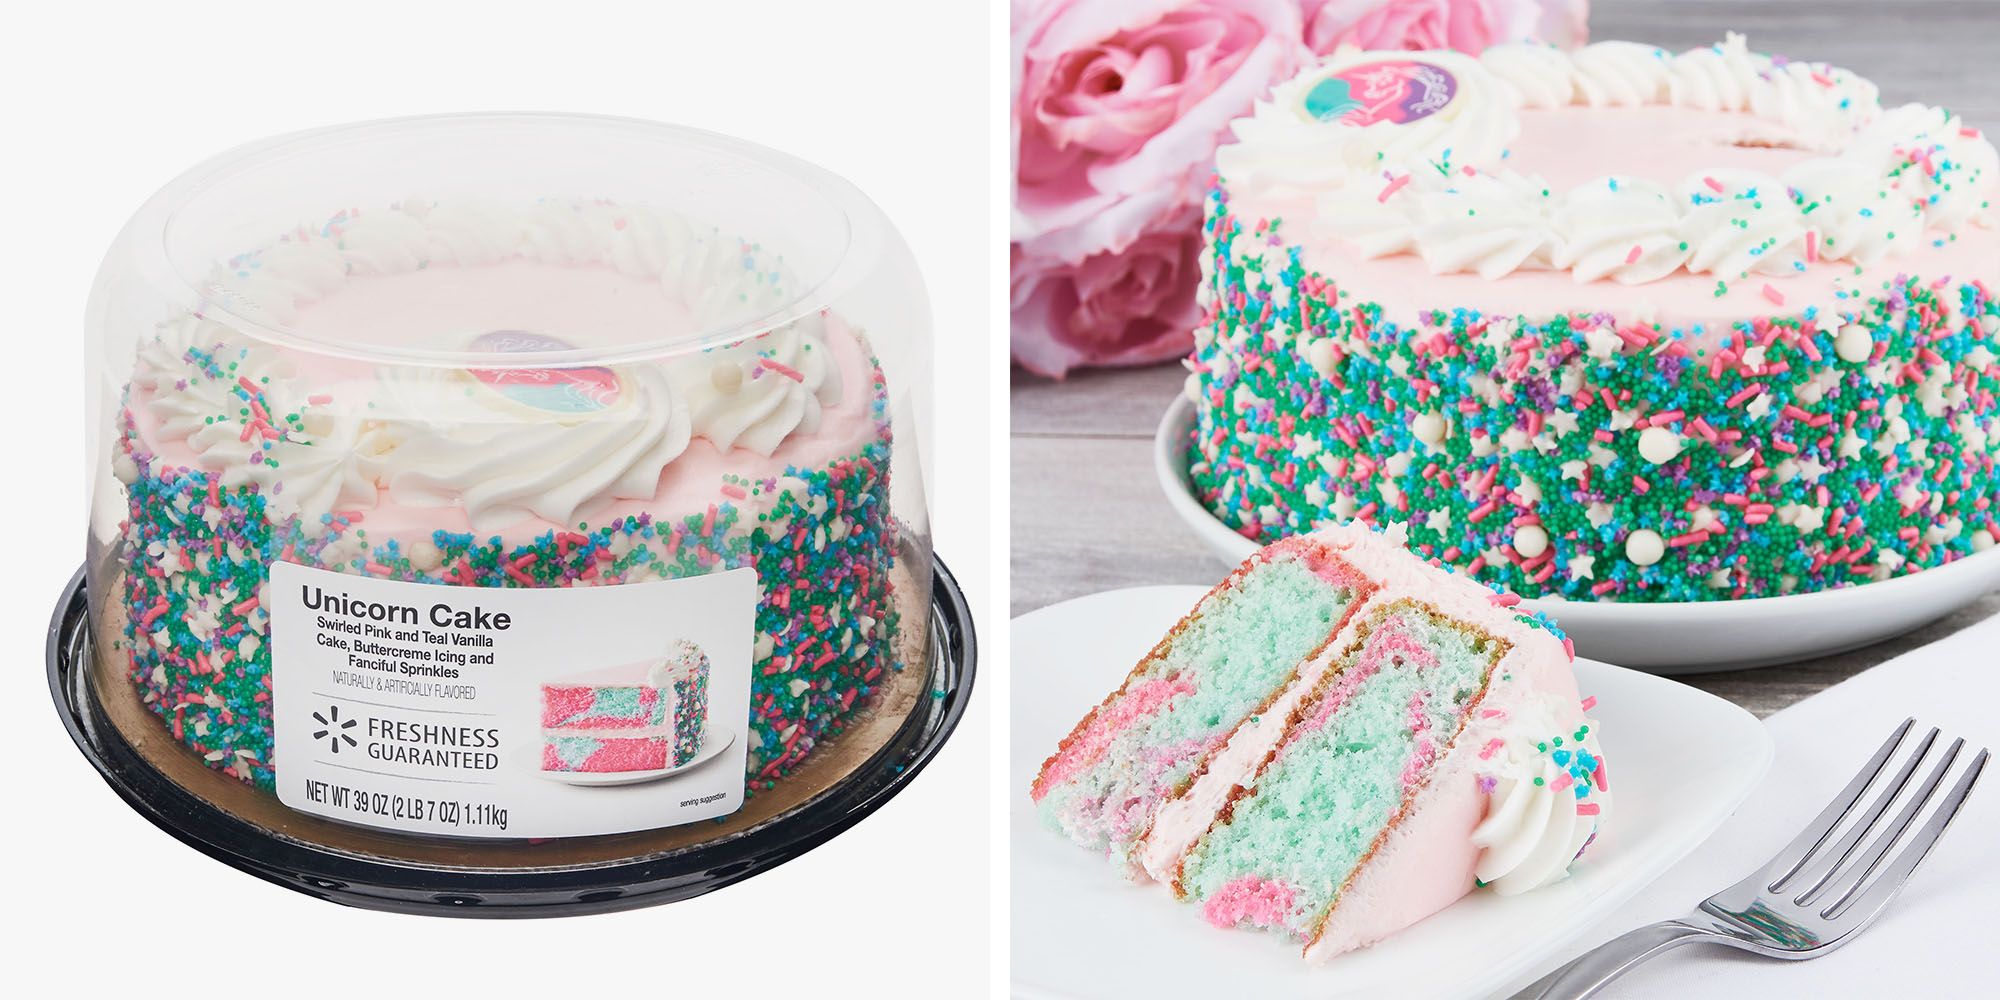 Walmart Is Selling a Rainbow Blast Cake That Has the Most Colorful Layers